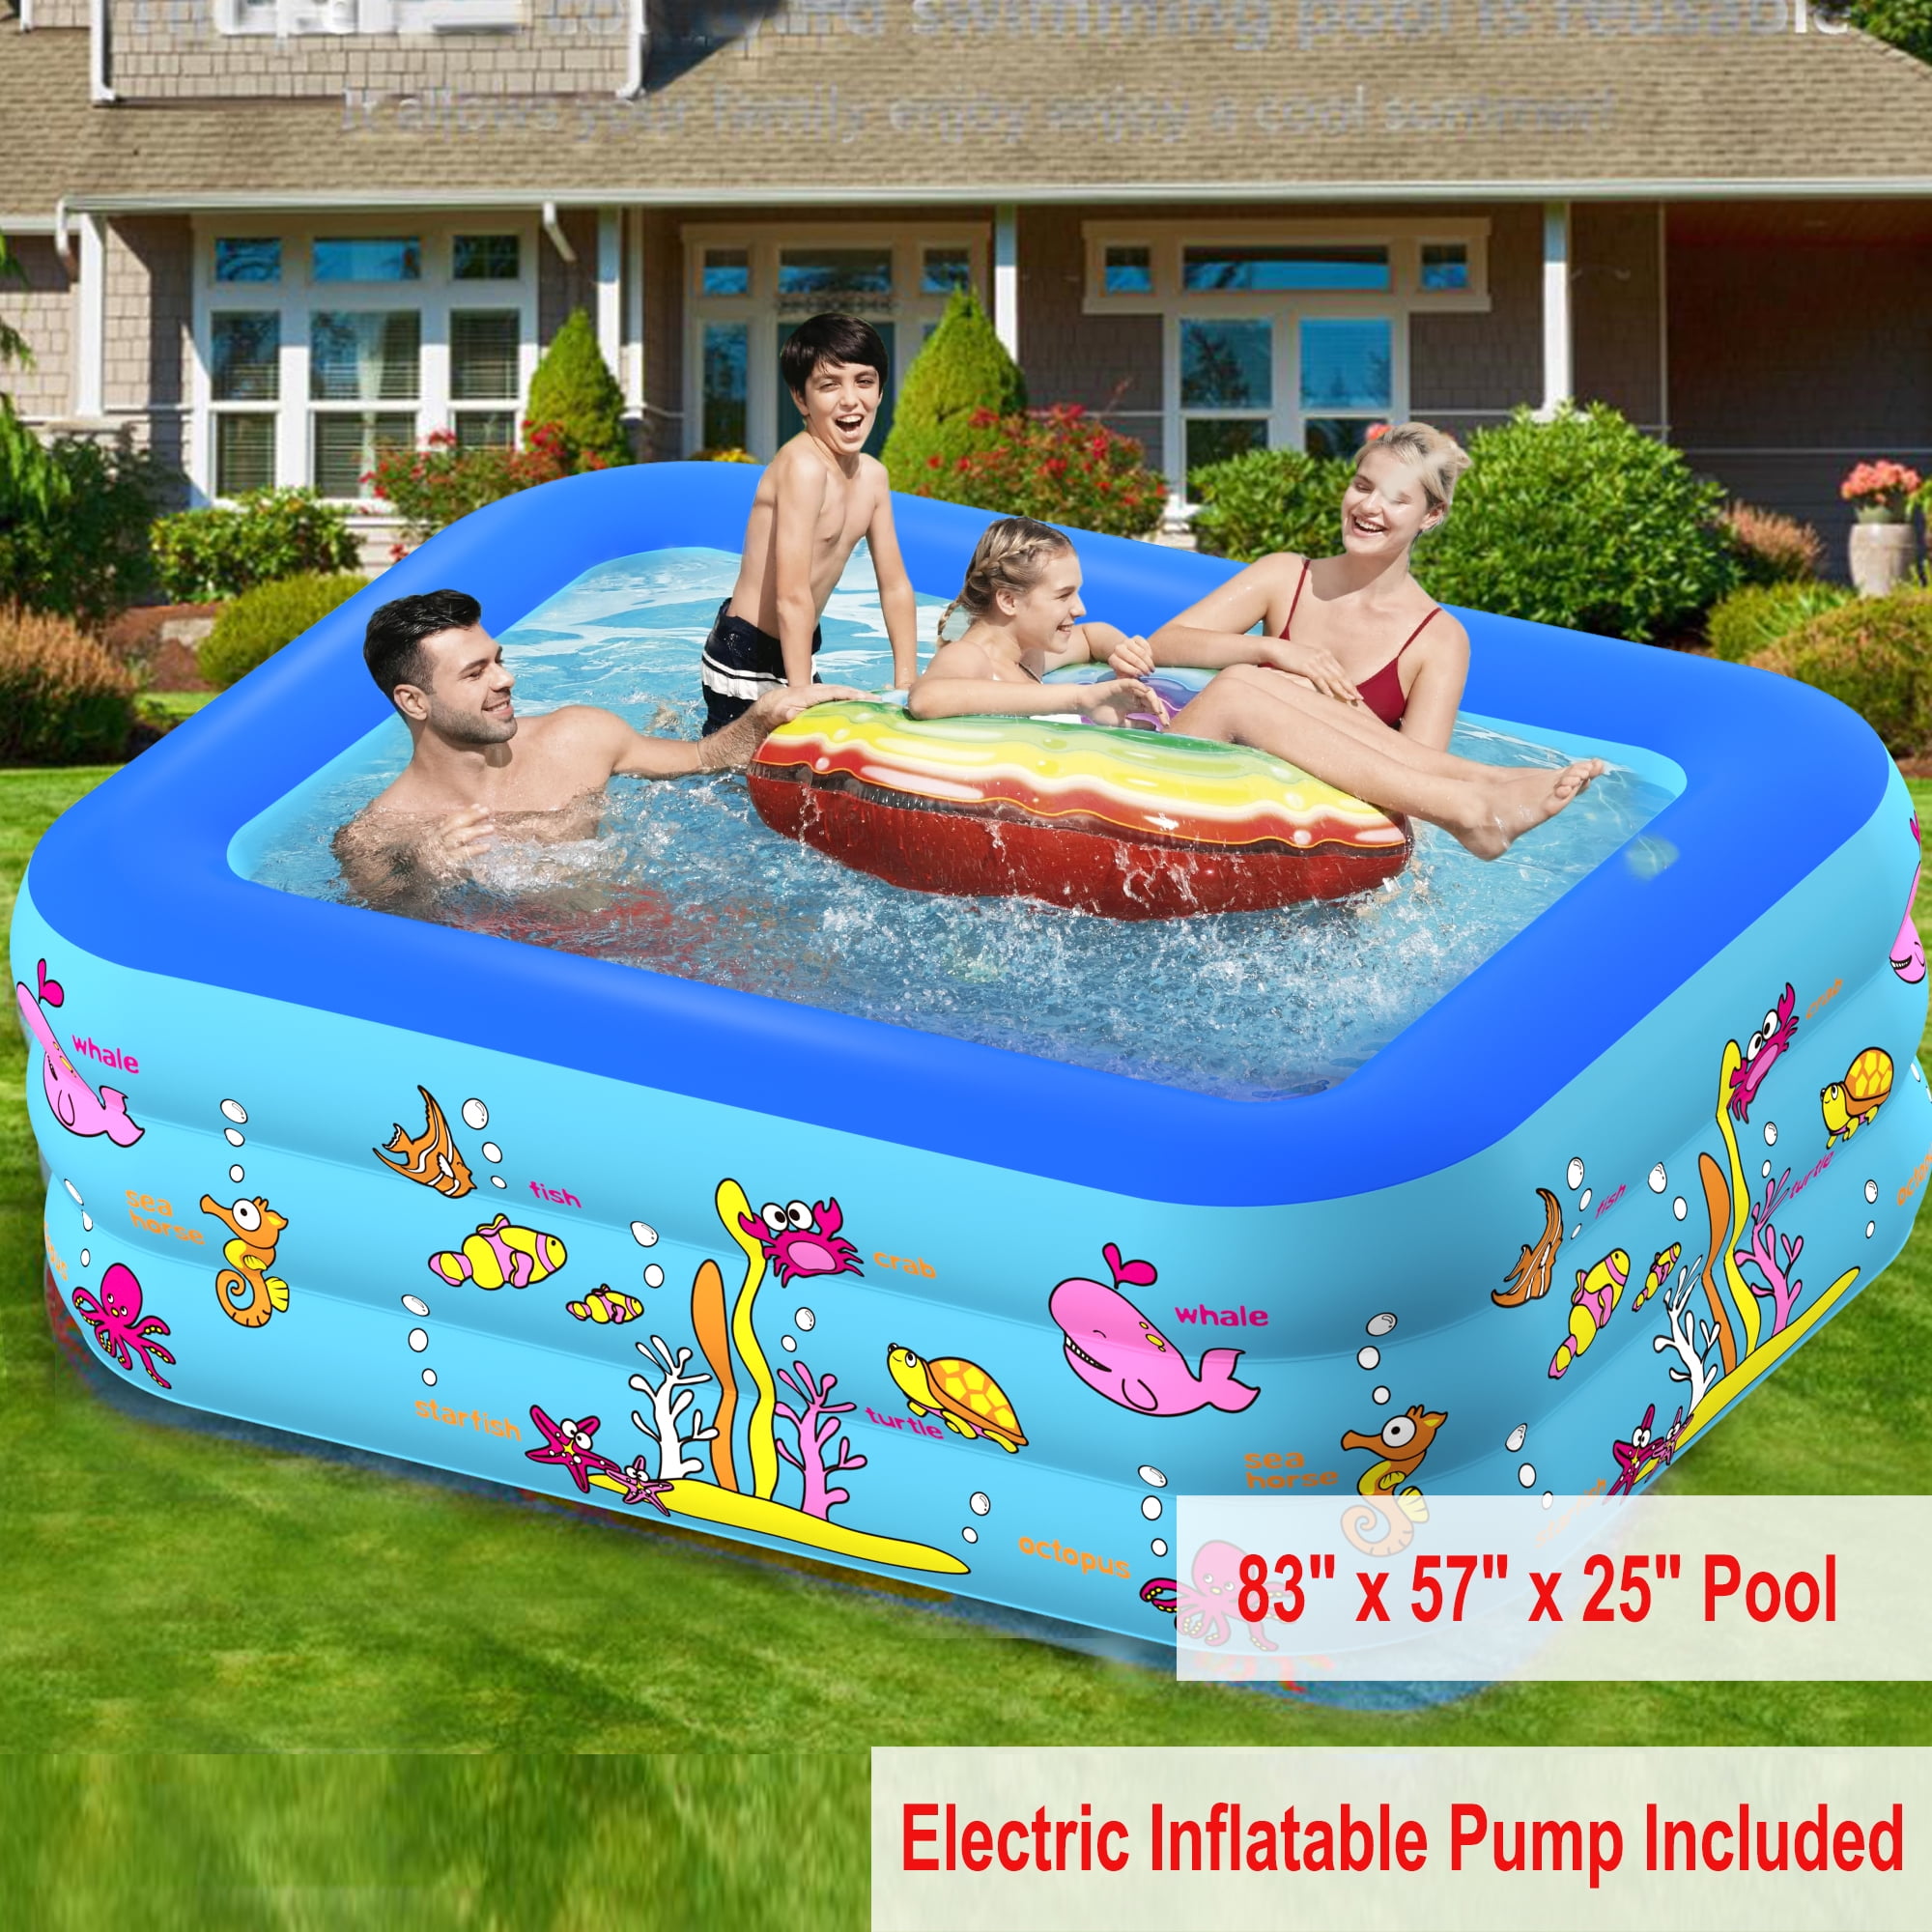 Garden,Outdoor Lawn Coopark Inflatable Swimming Pool for Kids and Adults Family Lounge Pools 97x63x22Full-Sized Large Above Ground Inflatable Pool Floats in Summer for Backyard 